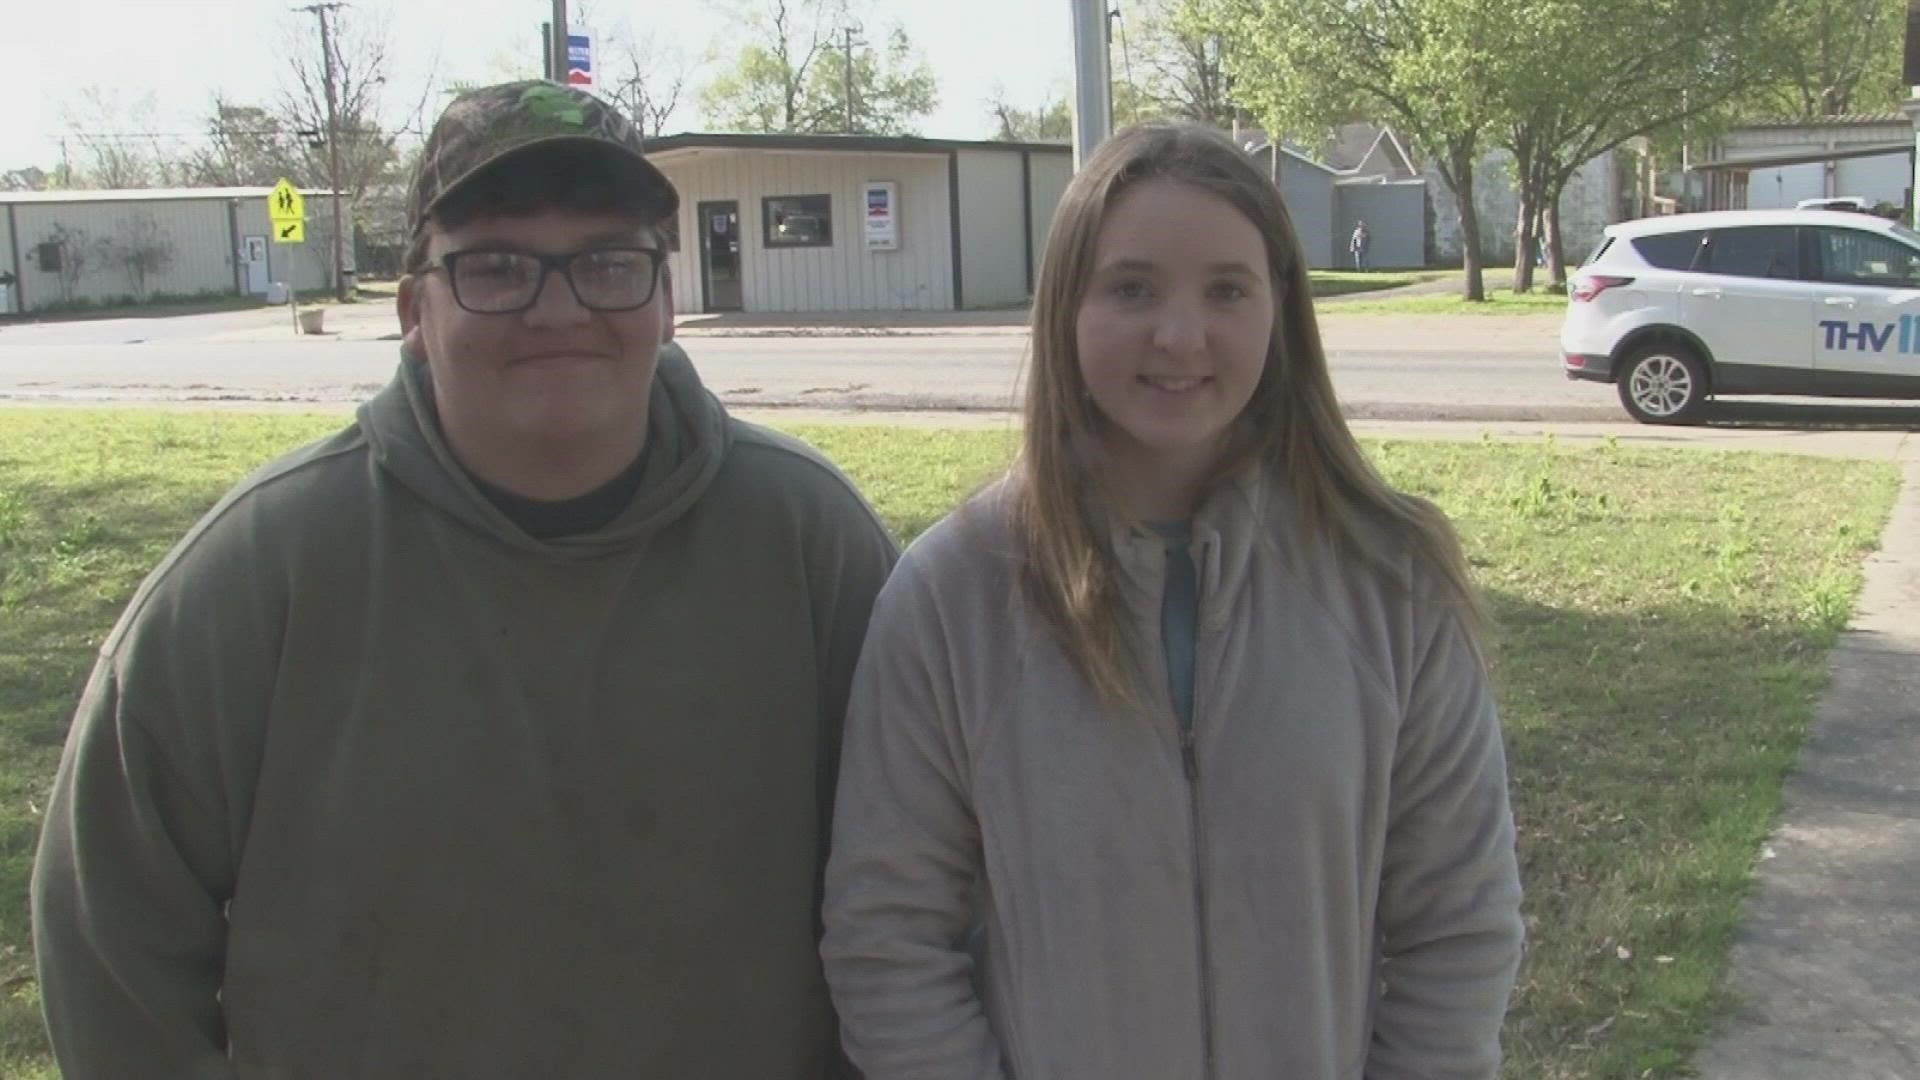 Dalton Weatherly and Avery Richards are Tuesday's Arkansans of the Day.